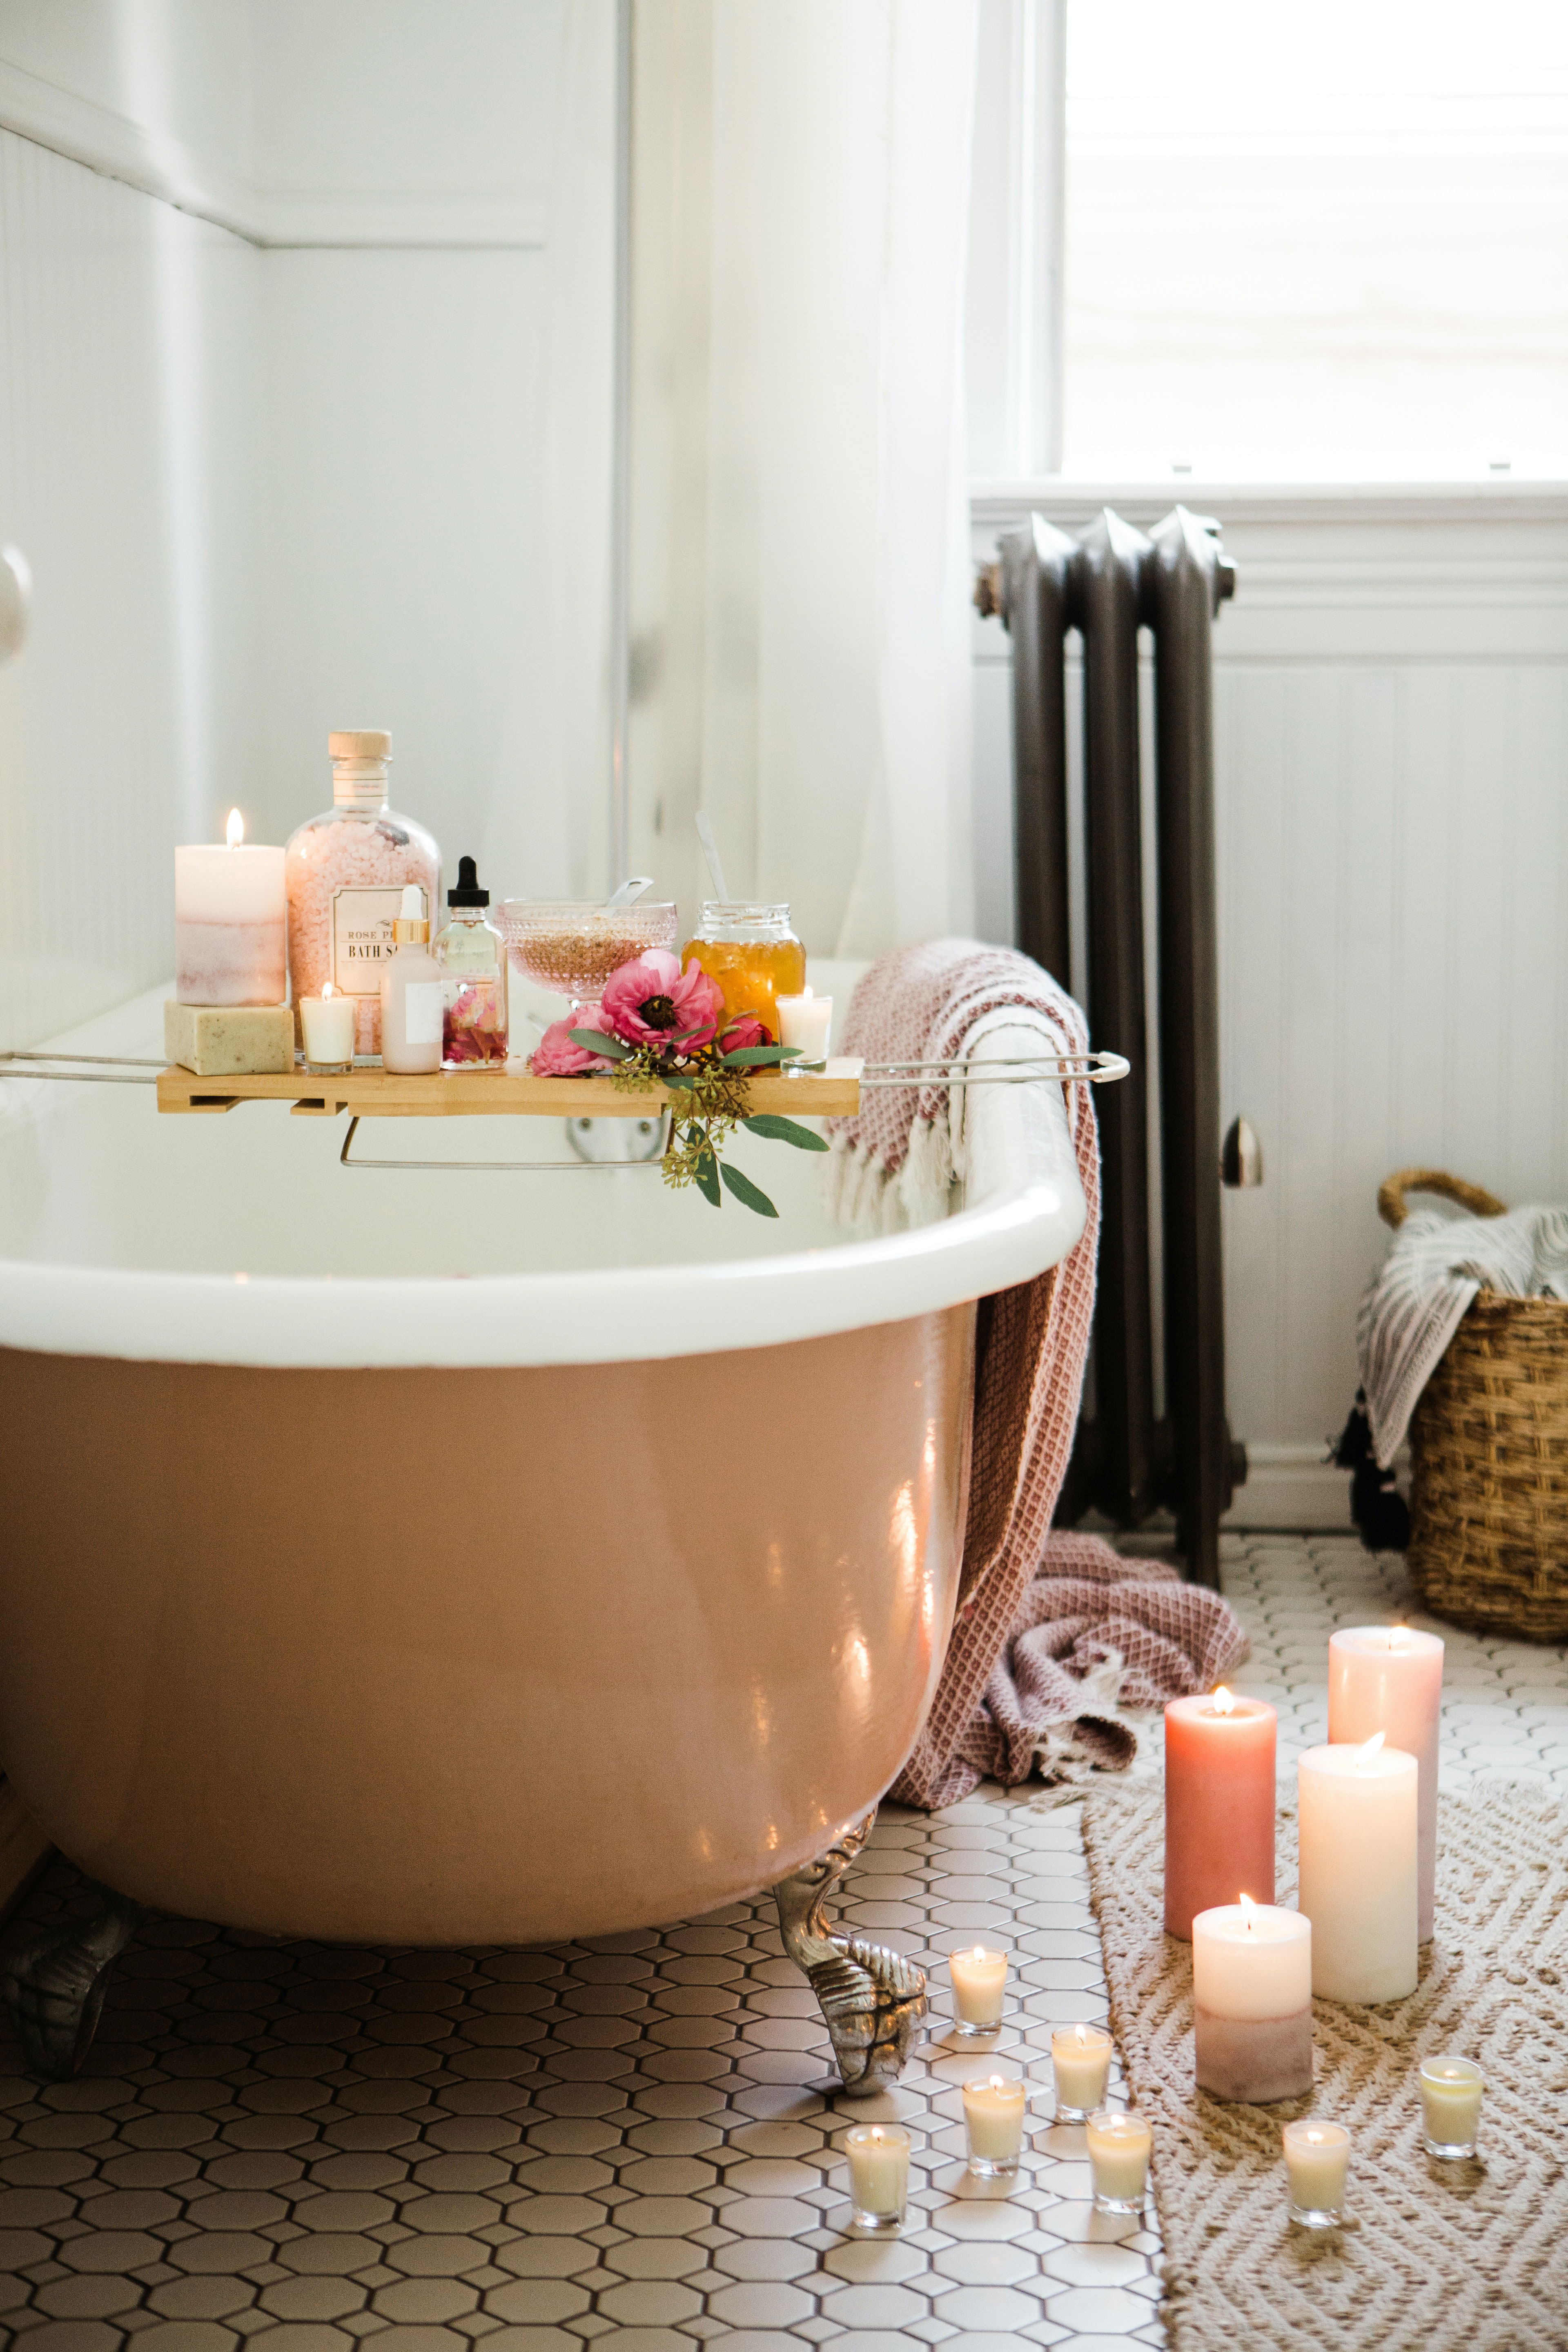 Clawfoot tub decorated with flowers and candles.